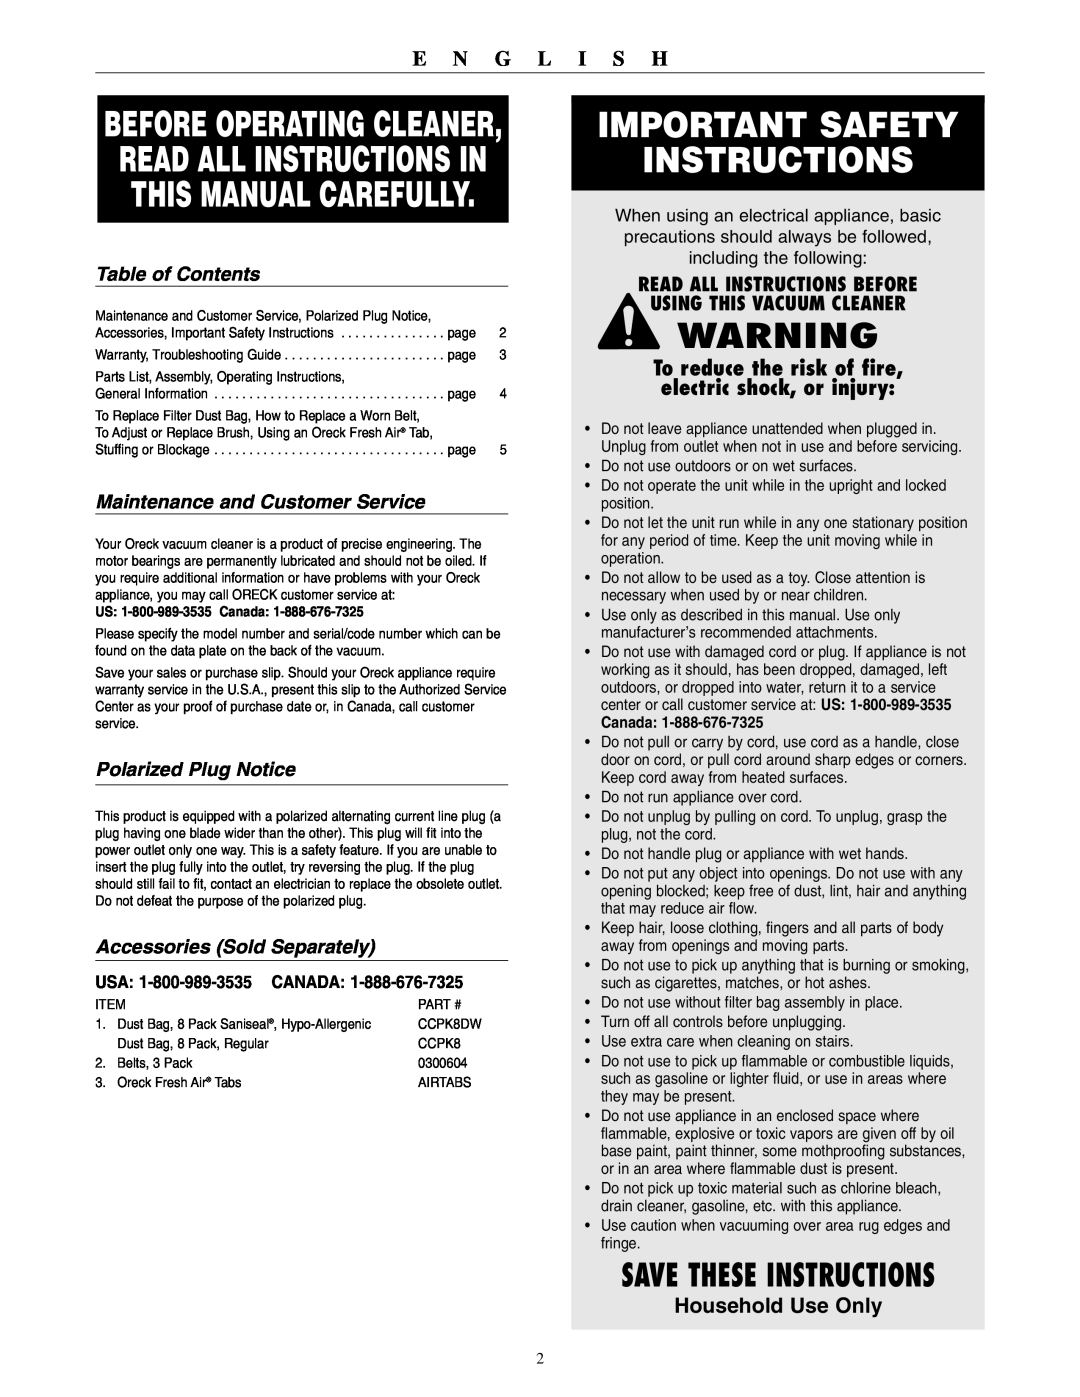 Oreck 2310RD Important Safety Instructions, E N G L I S H, Household Use Only, Table of Contents, Polarized Plug Notice 